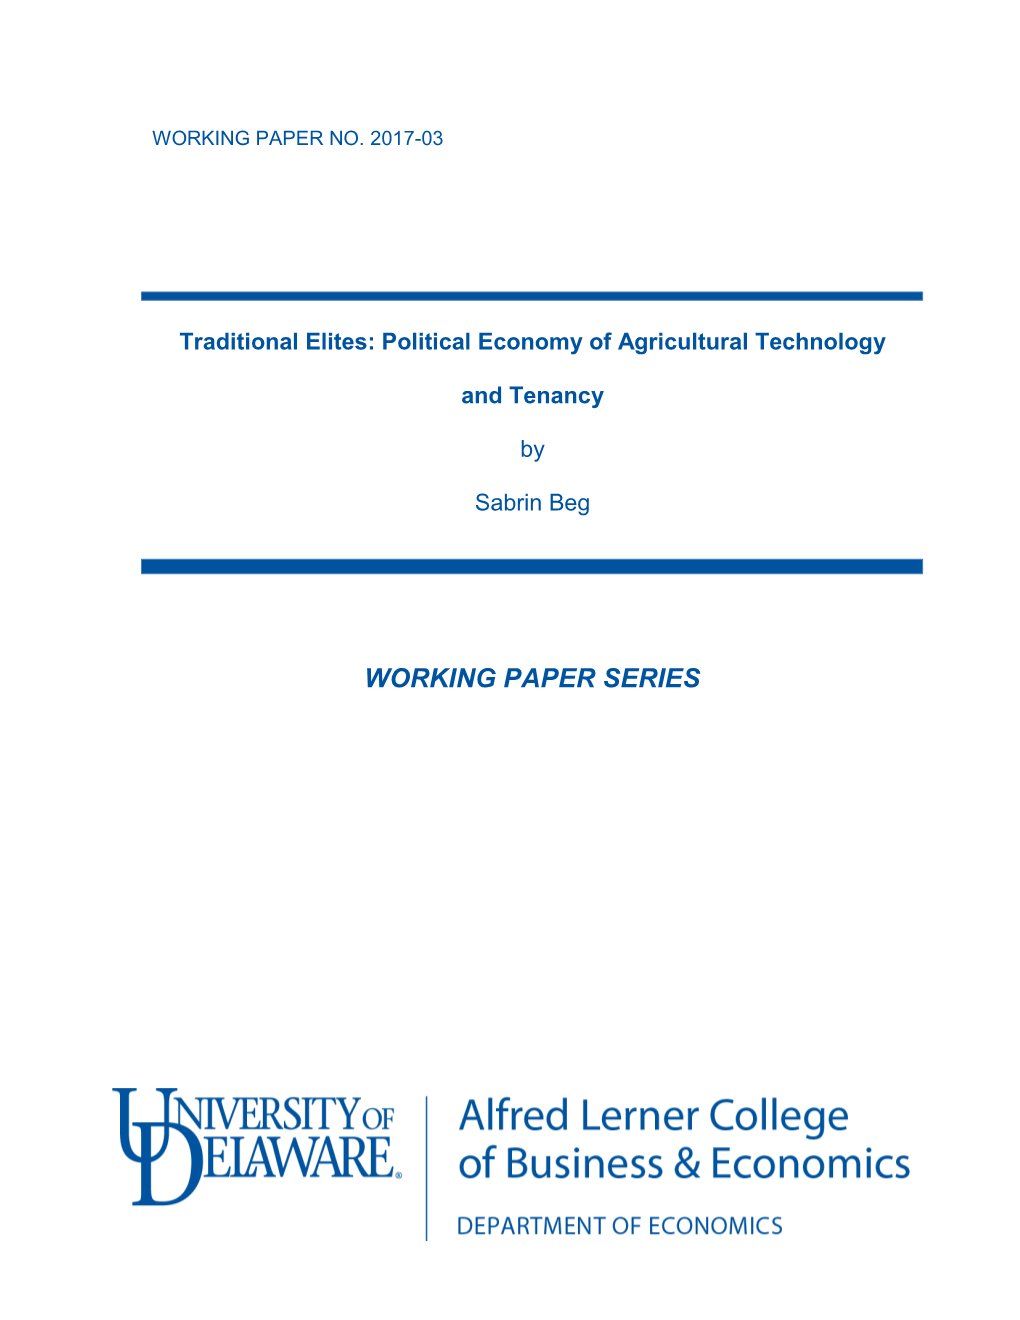 Traditional Elites: Political Economy of Agricultural Technology and Tenancy